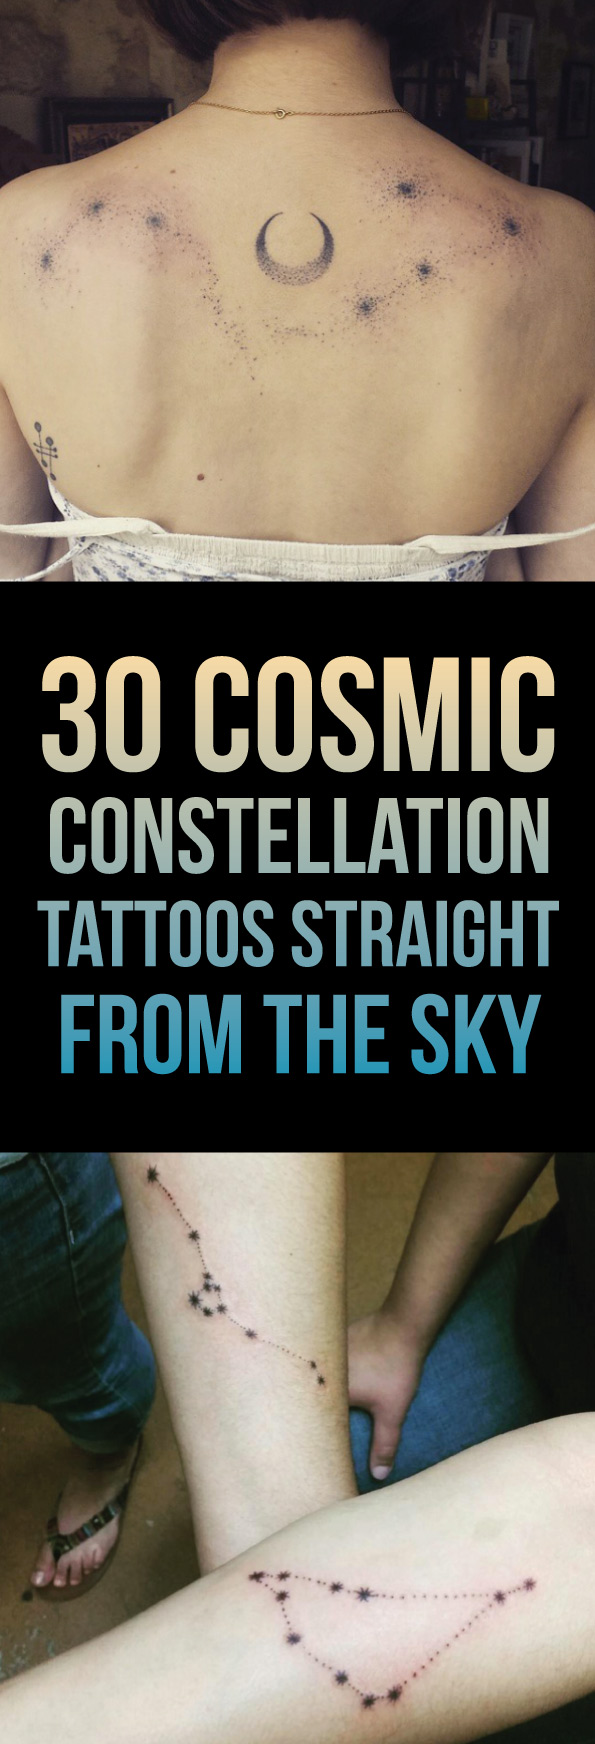 30 Cosmic Constellation Tattoos Straight From The Sky | TattooBlend